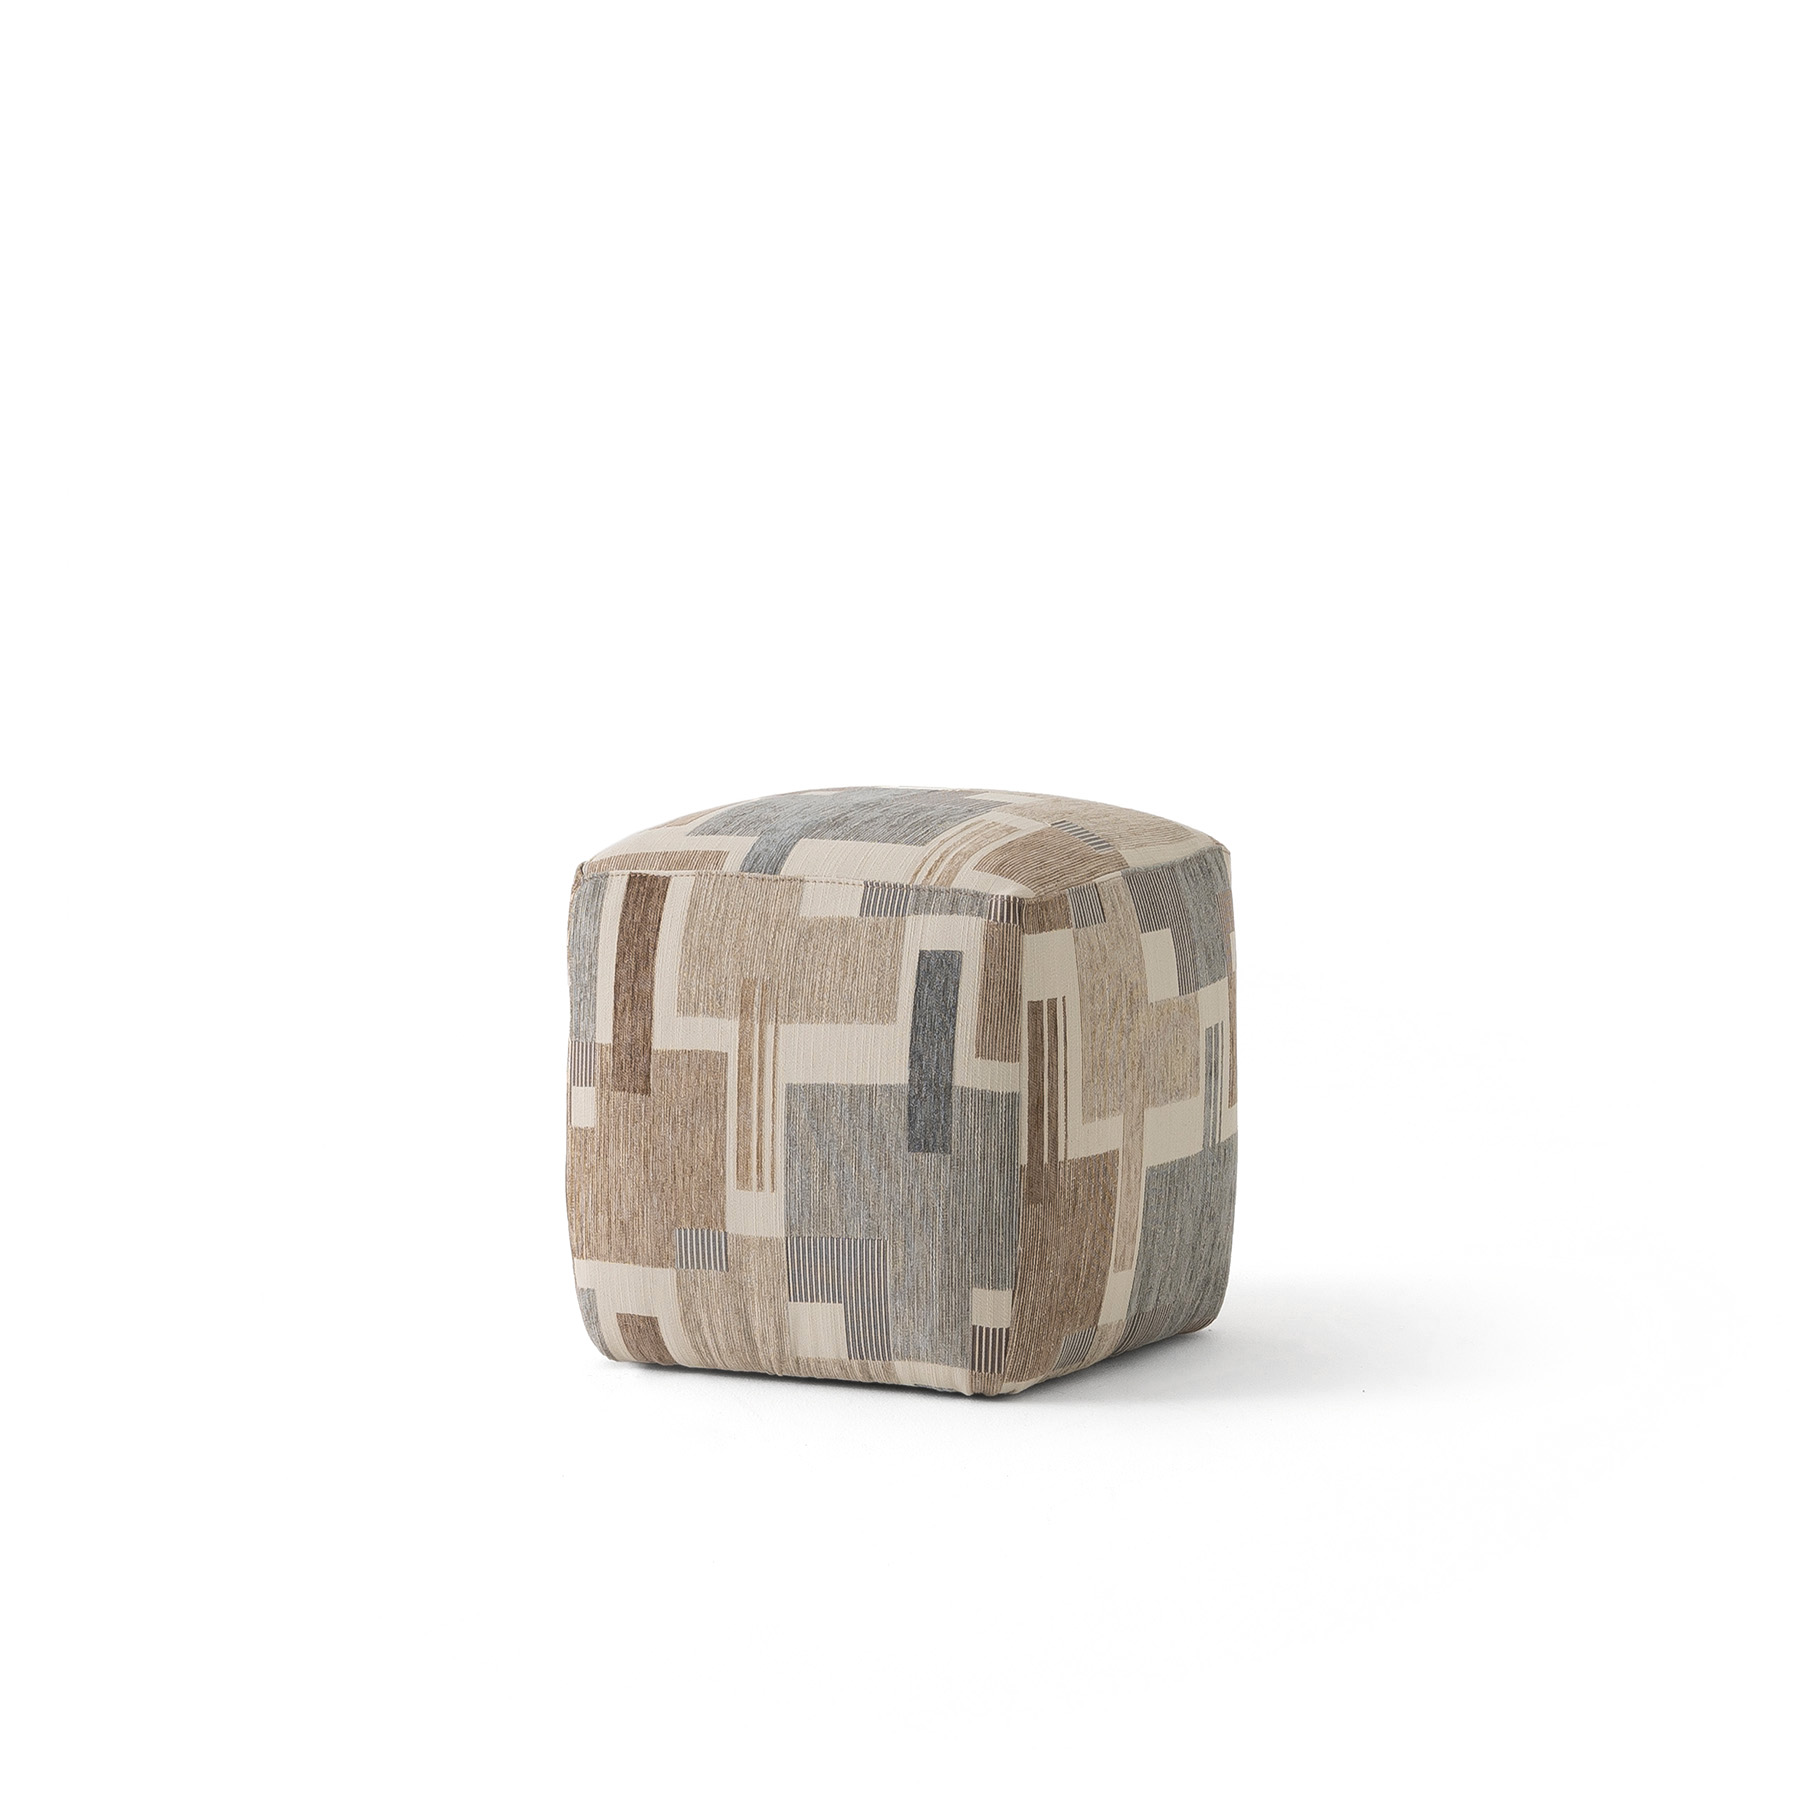 california cube ottoman with a colorful artistic upholstery